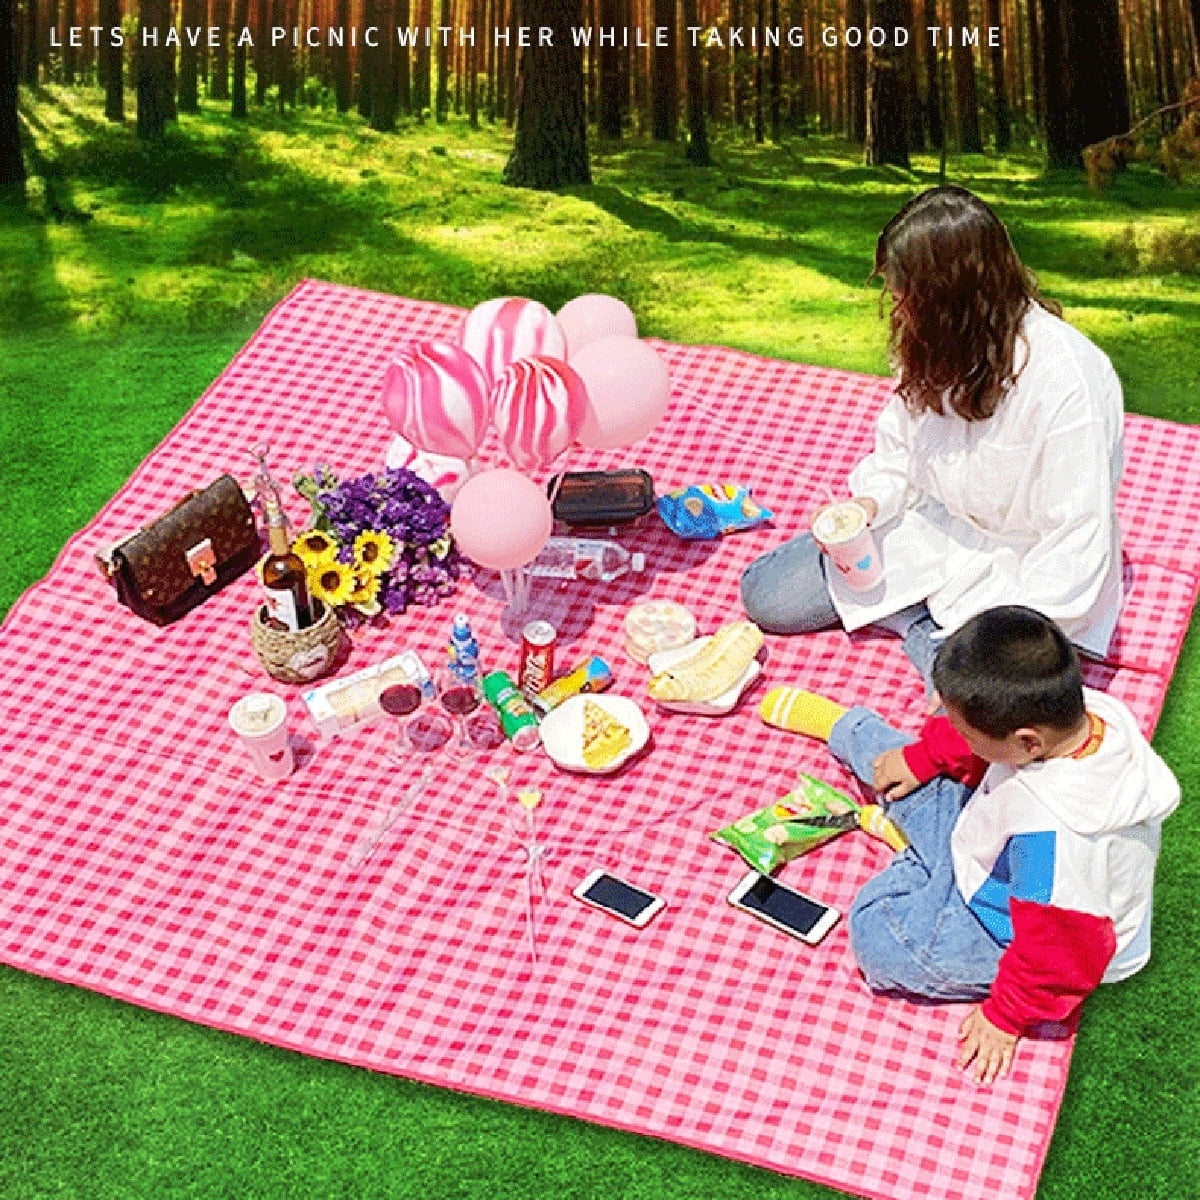 Blue,80 X 59 FUMISO Picnic Outdoor Blanket Park Blanket Beach Mat for Camping on Grass Oversized Seats Adults Water Resistant Picnic Mat